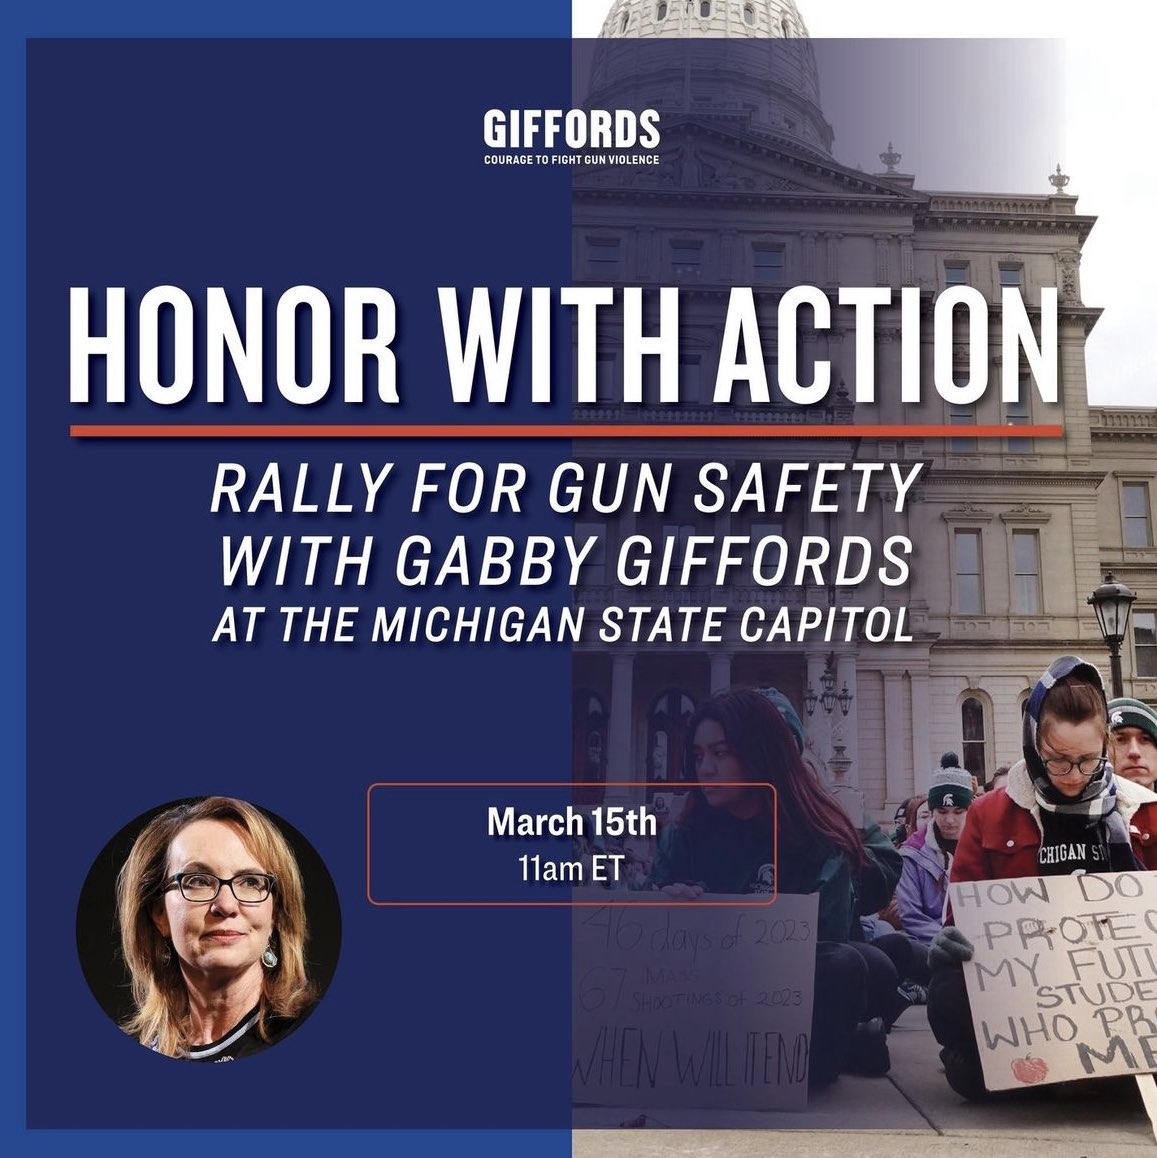 Join coalition members in Lansing with @GabbyGiffords, @RepSlotkin, @WinnieBrinks and advocates from @MomsDemand, @GiffordsCourage, @StudentsDemand, and @nofuturewithout2day